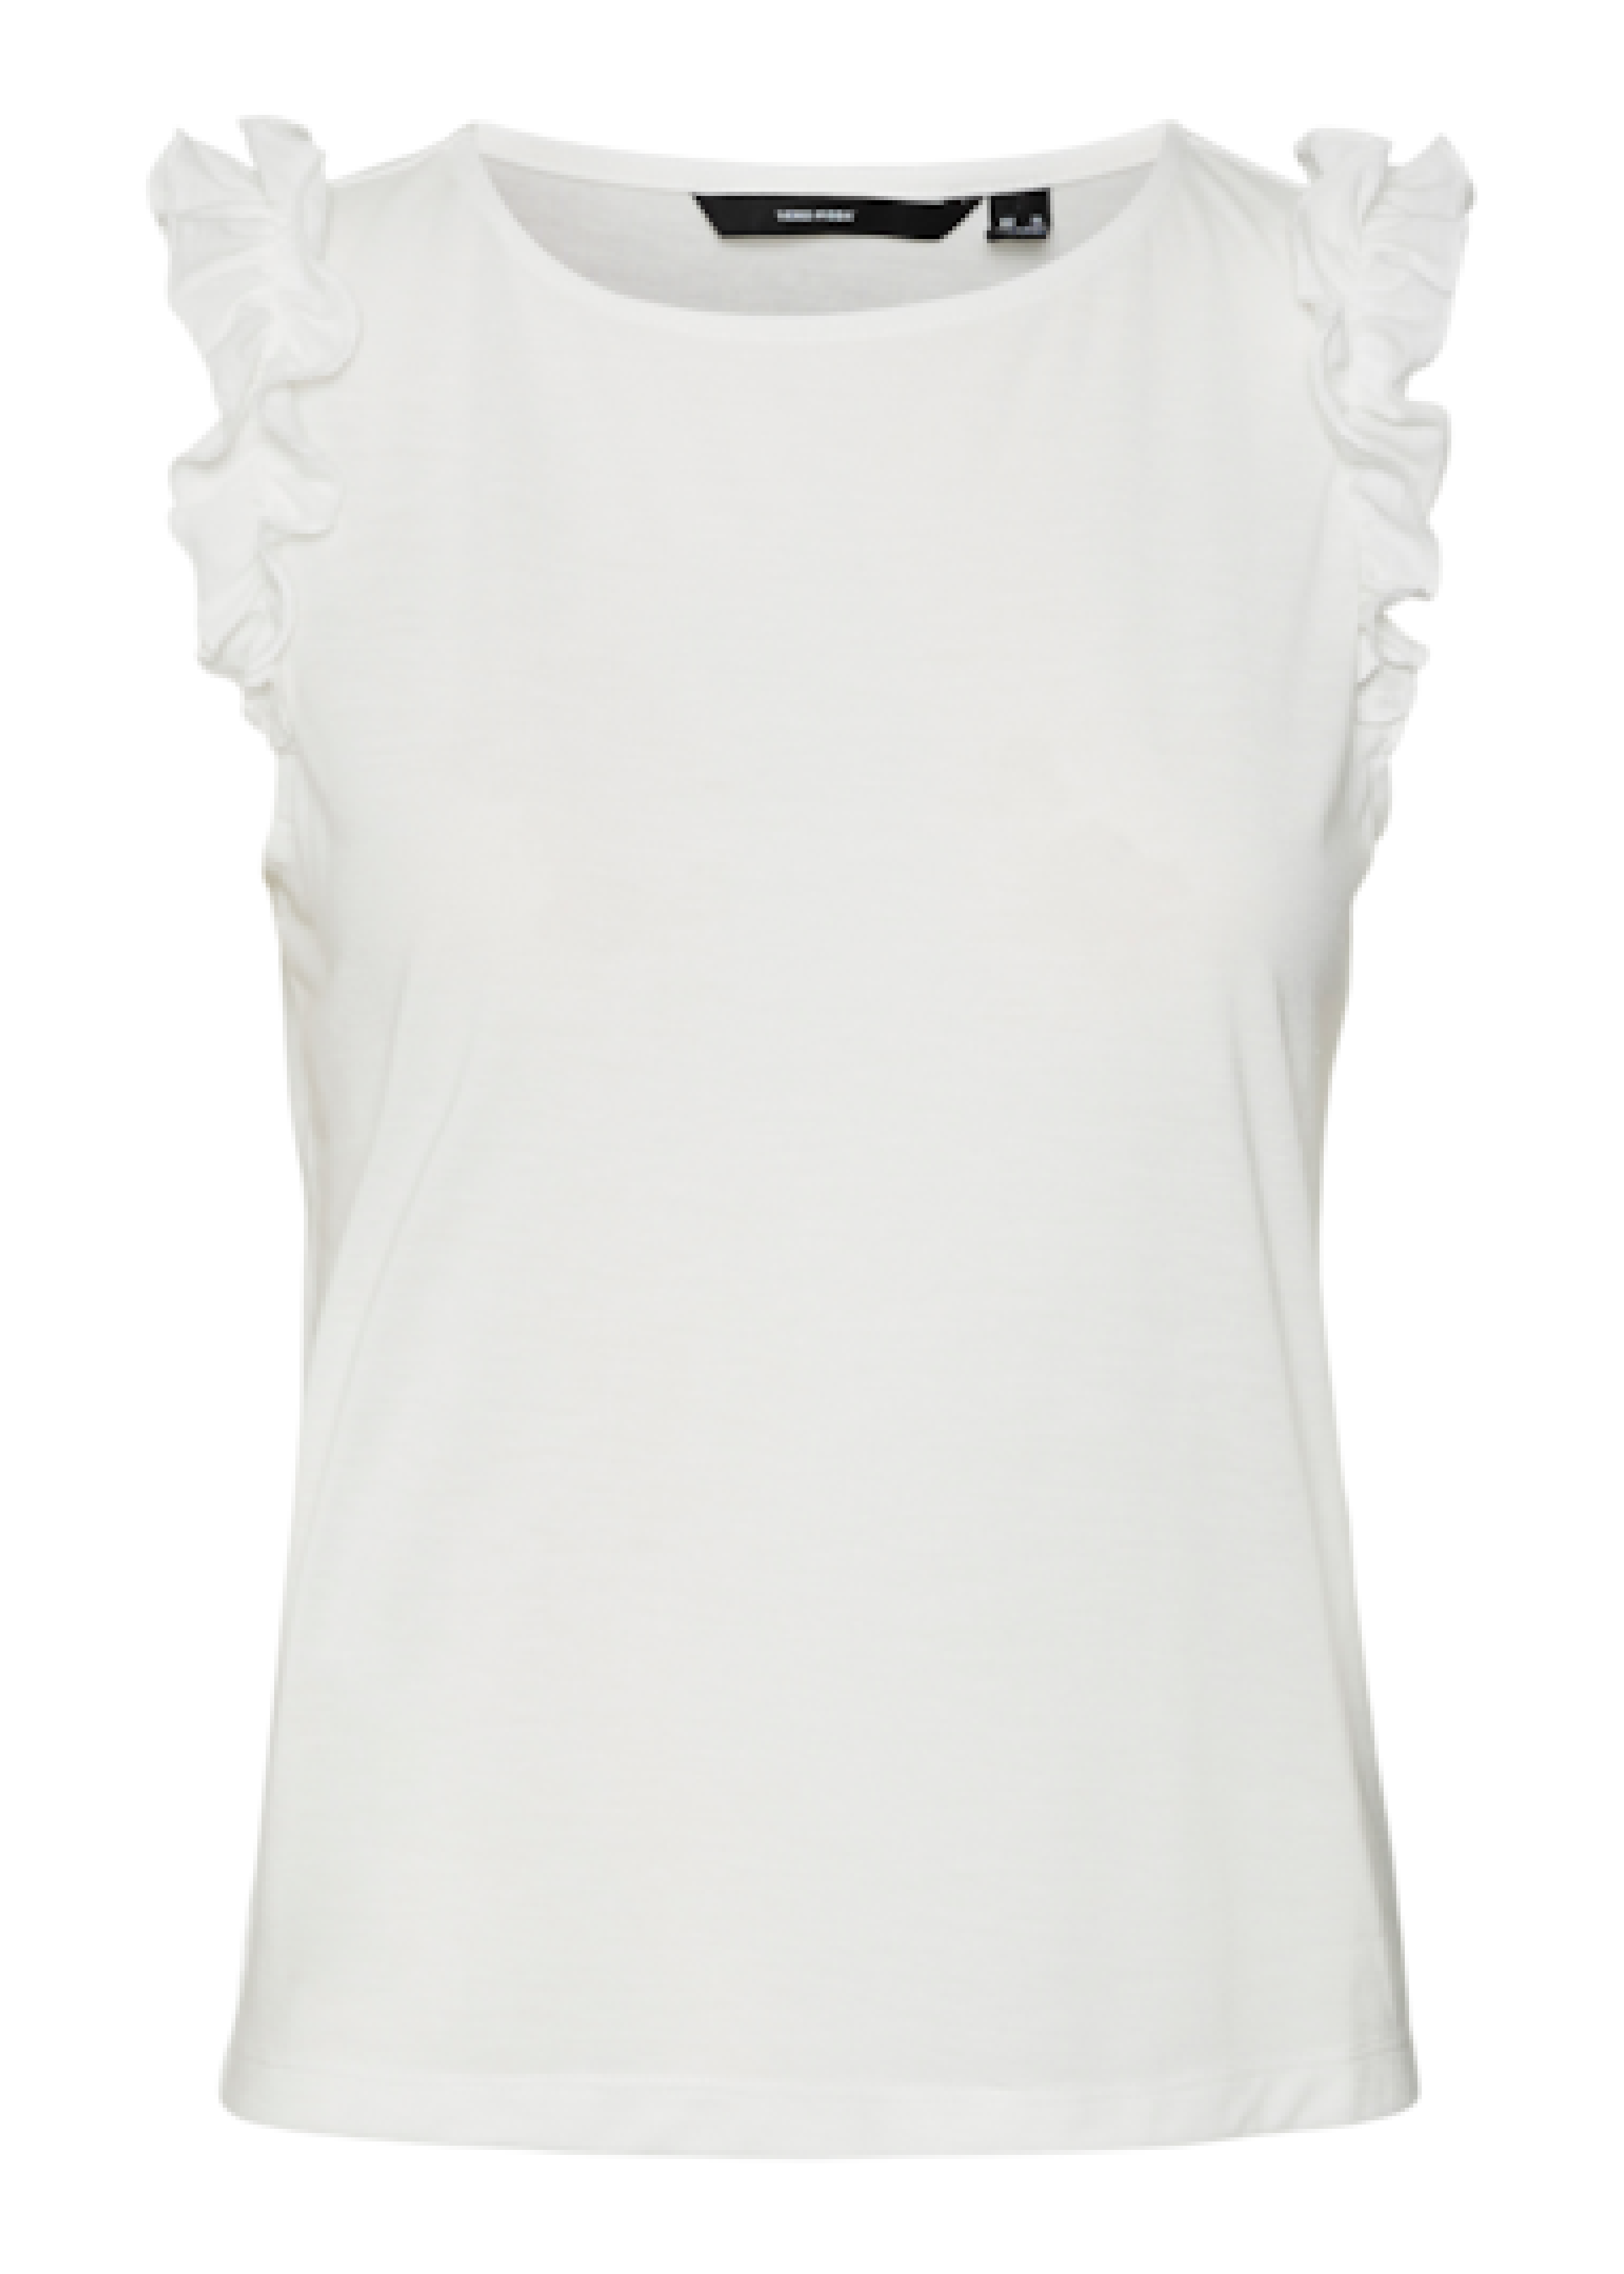 Spicy Snow White Frill Top